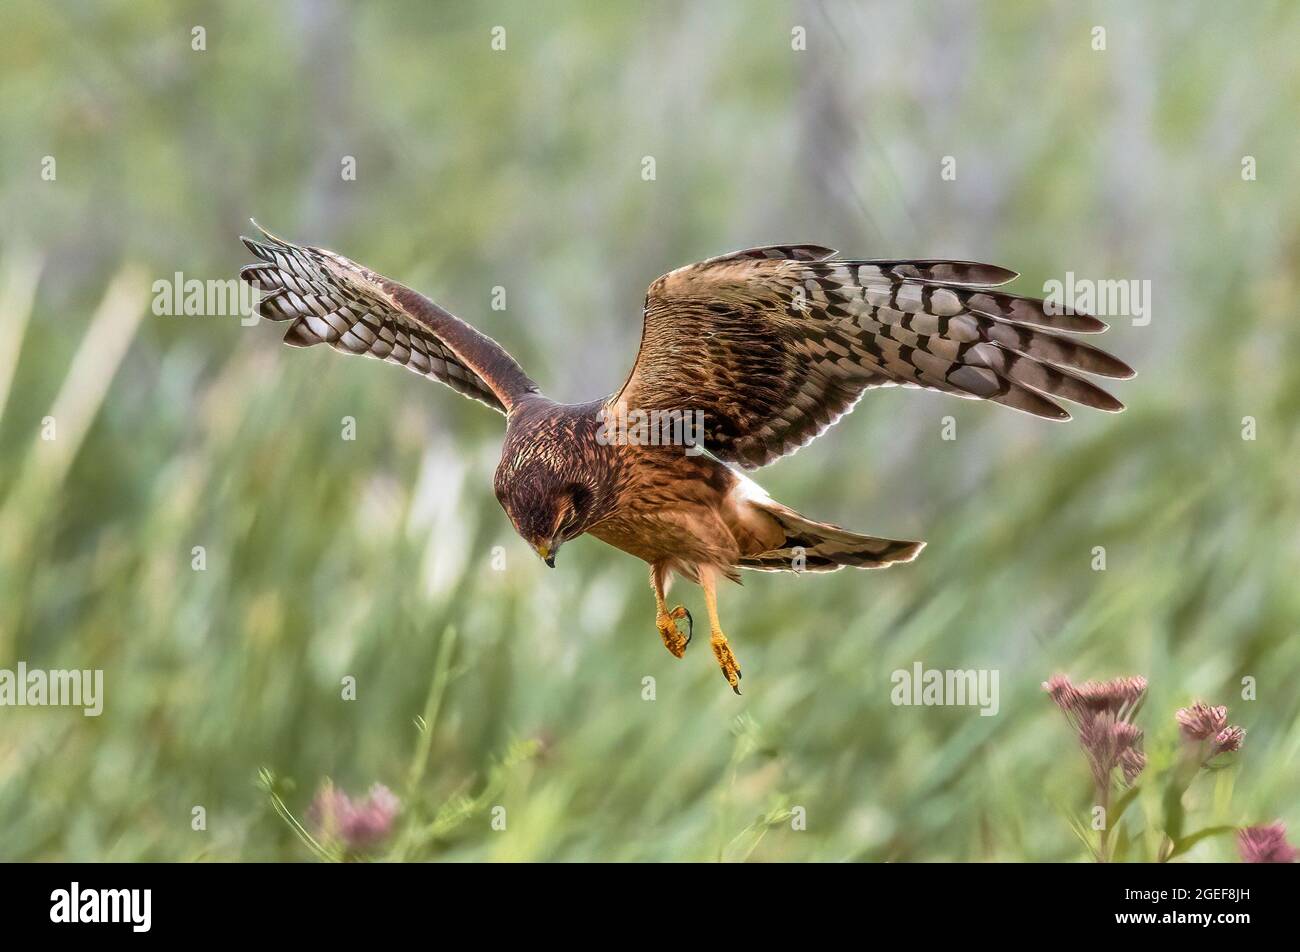 An image of a hawk in flight, hovering closely above the ground, in search of prey. The winds are outstretched and the legs and claws extended. Stock Photo